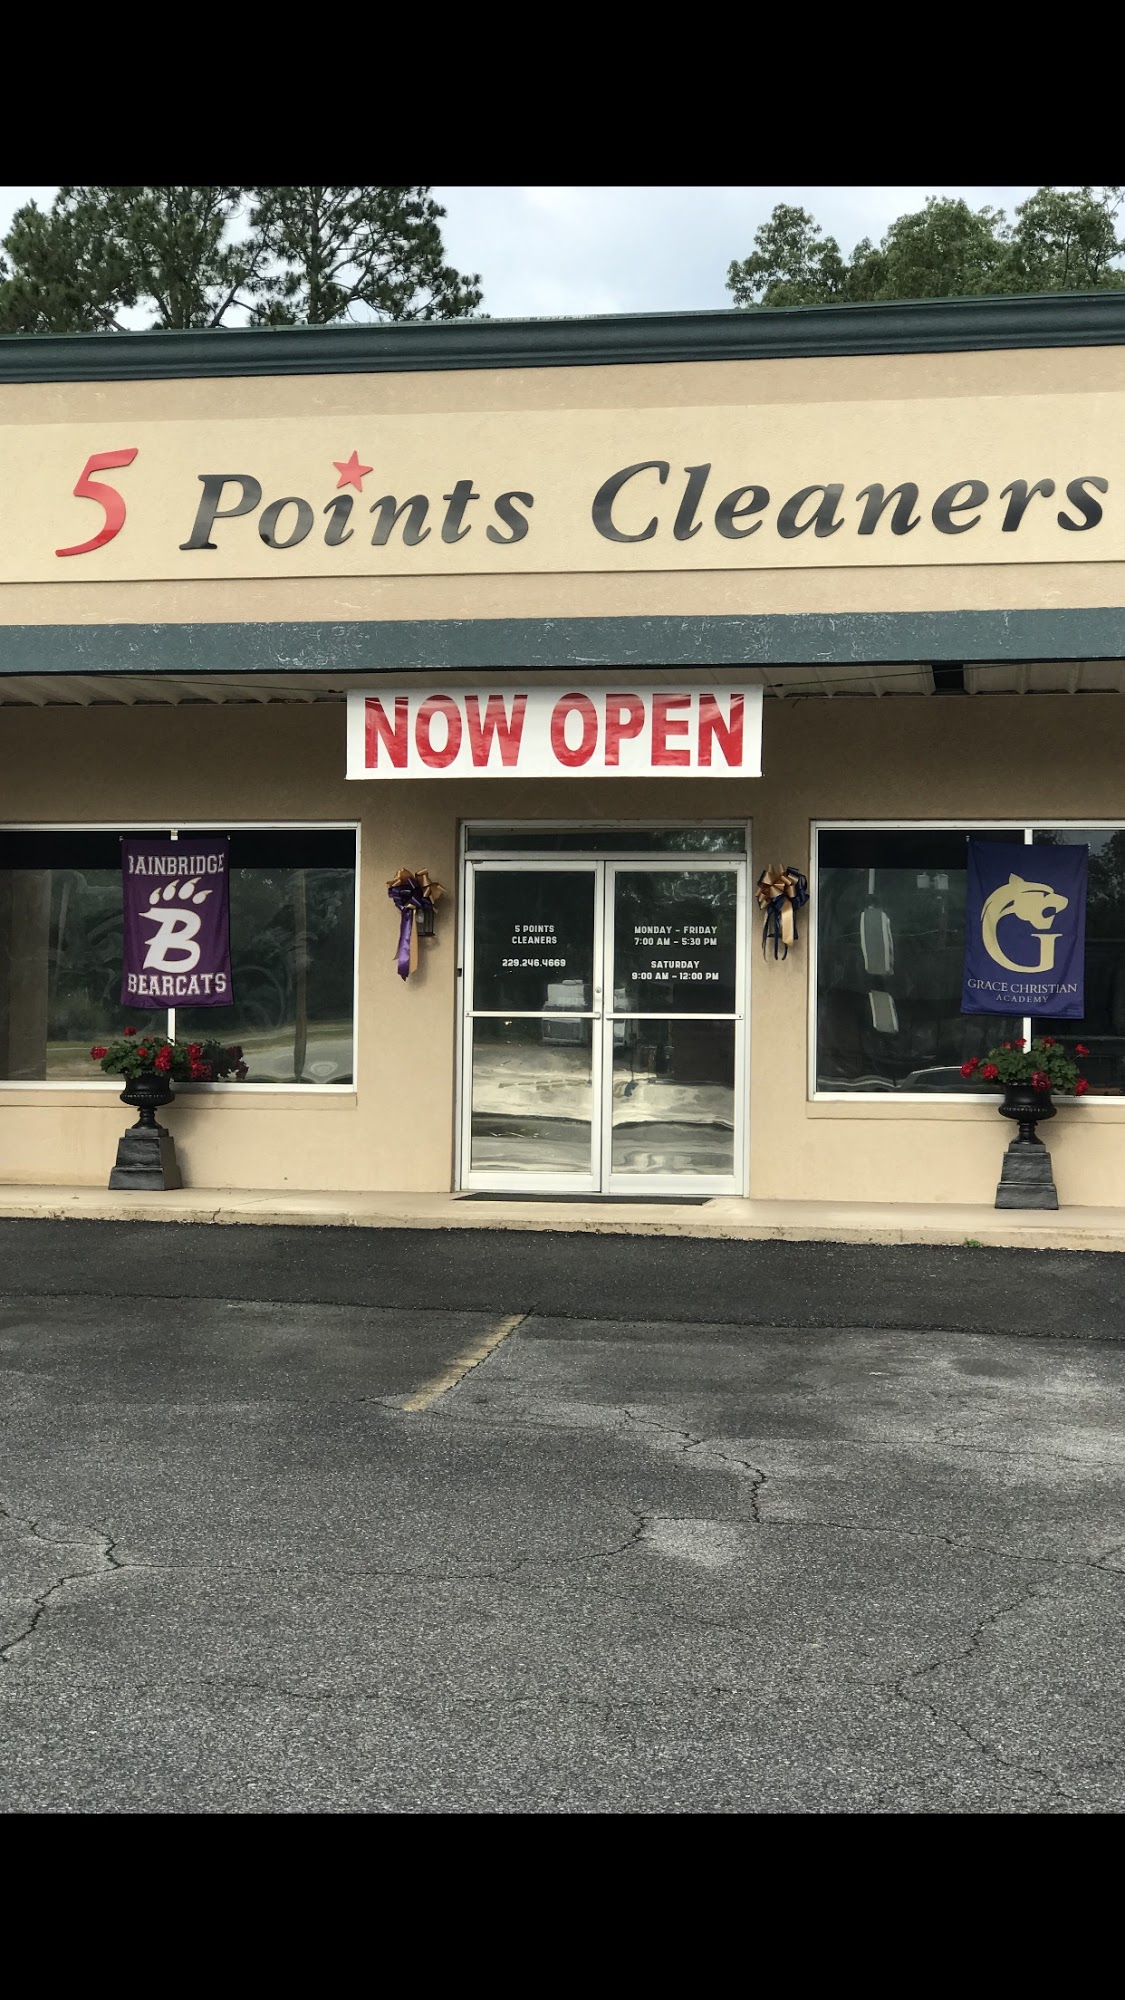 5 Points Cleaners